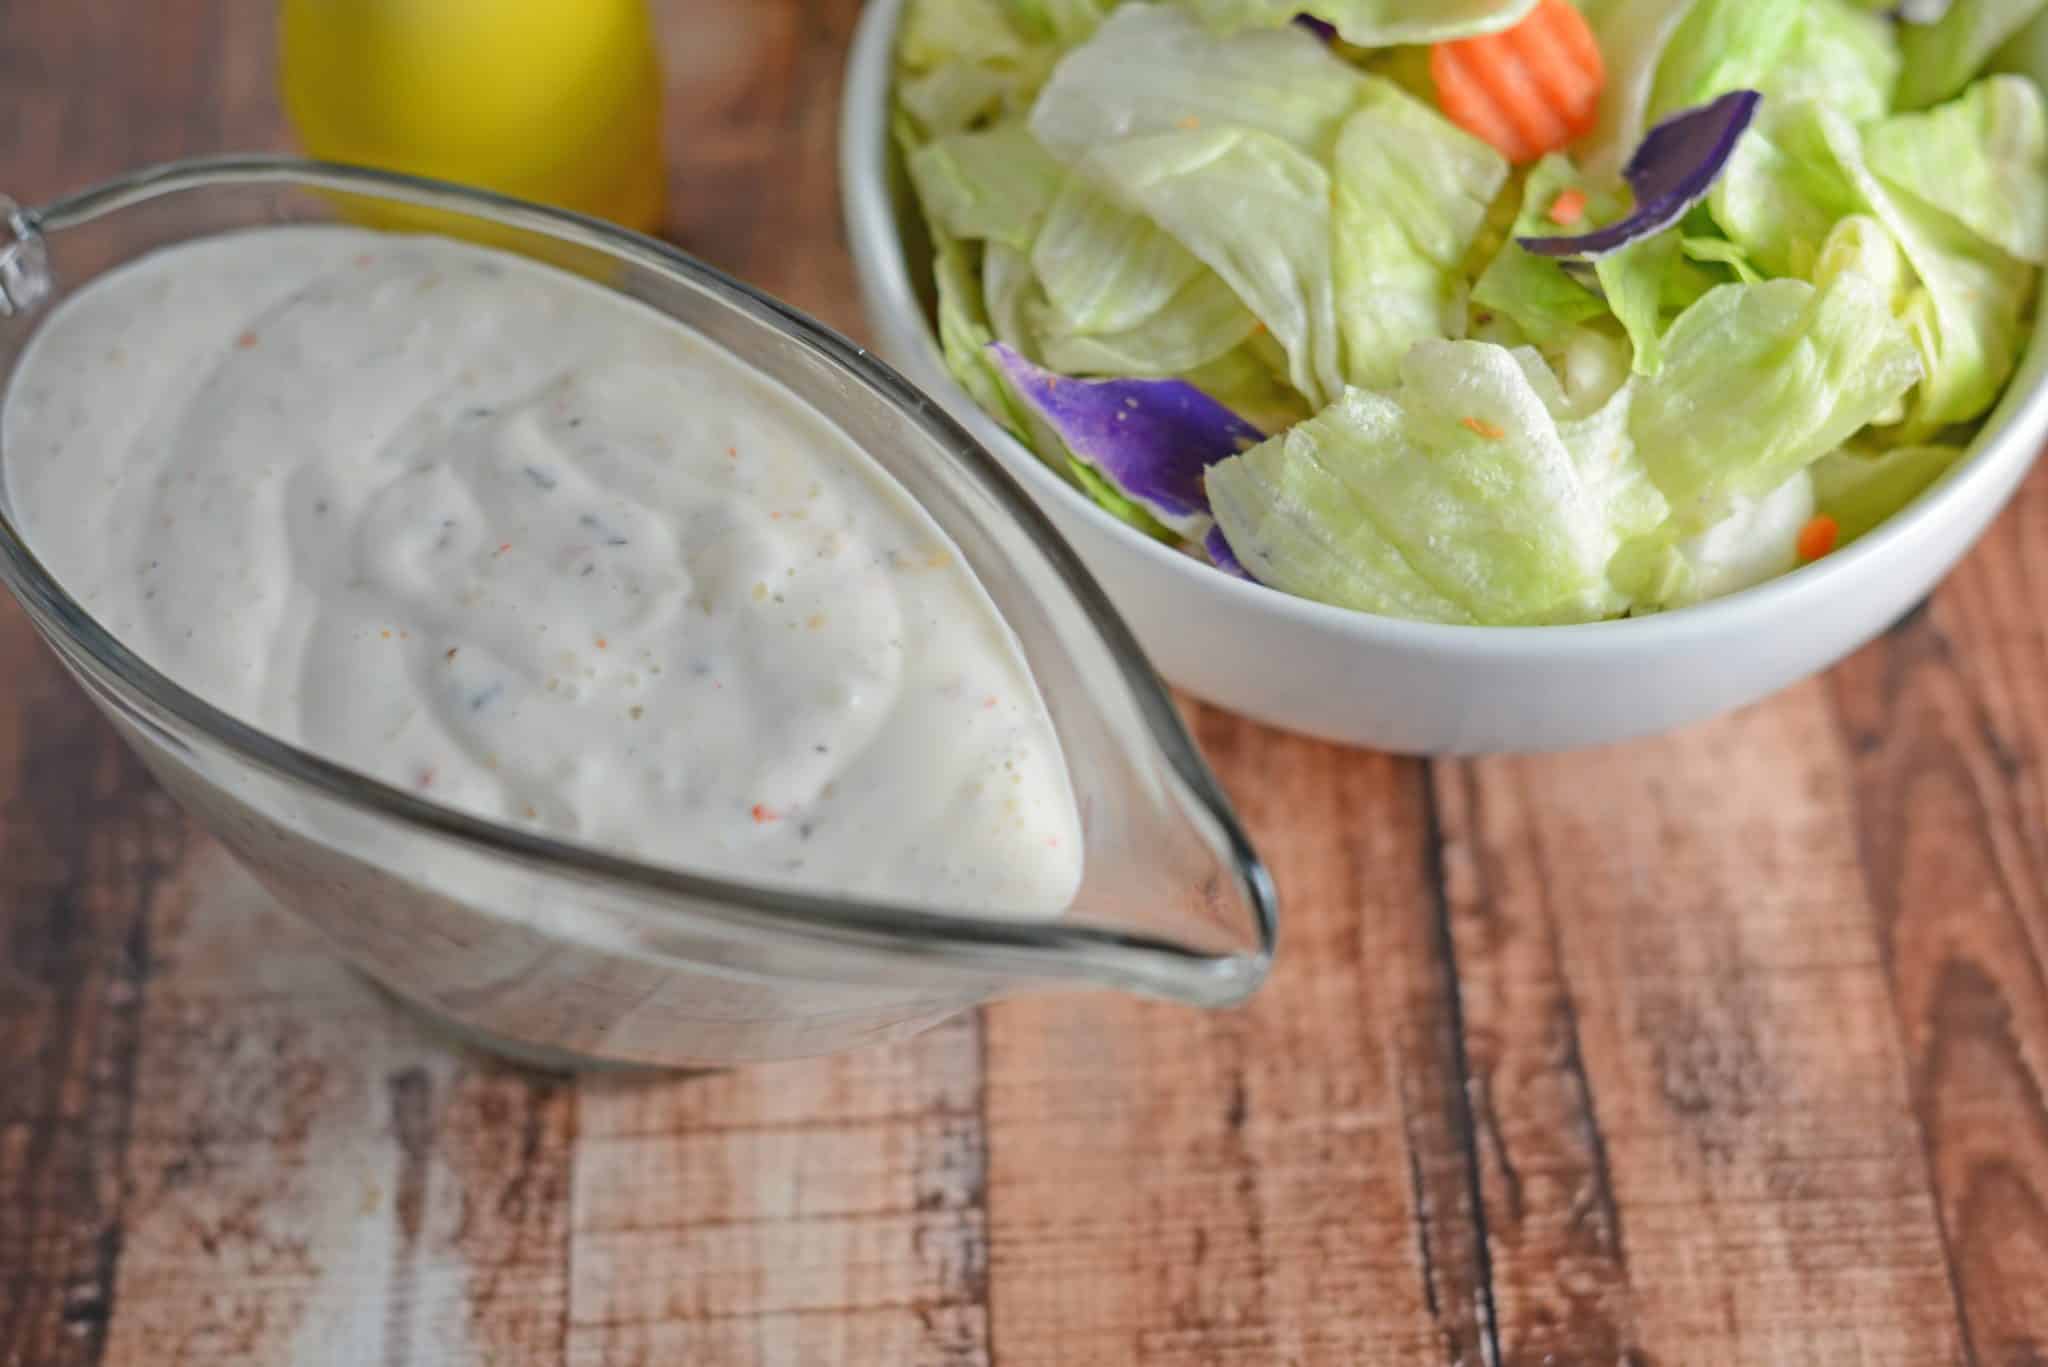 Creamy Italian Dressing a creamy, zesty Italian dressing that you will fall in love with. In 10 minutes or less you can have a homemade Italian dressing. #homemadeitaliandressing #creamyitaliandressing #italiandressingrecipe www.savoryexperiments.com